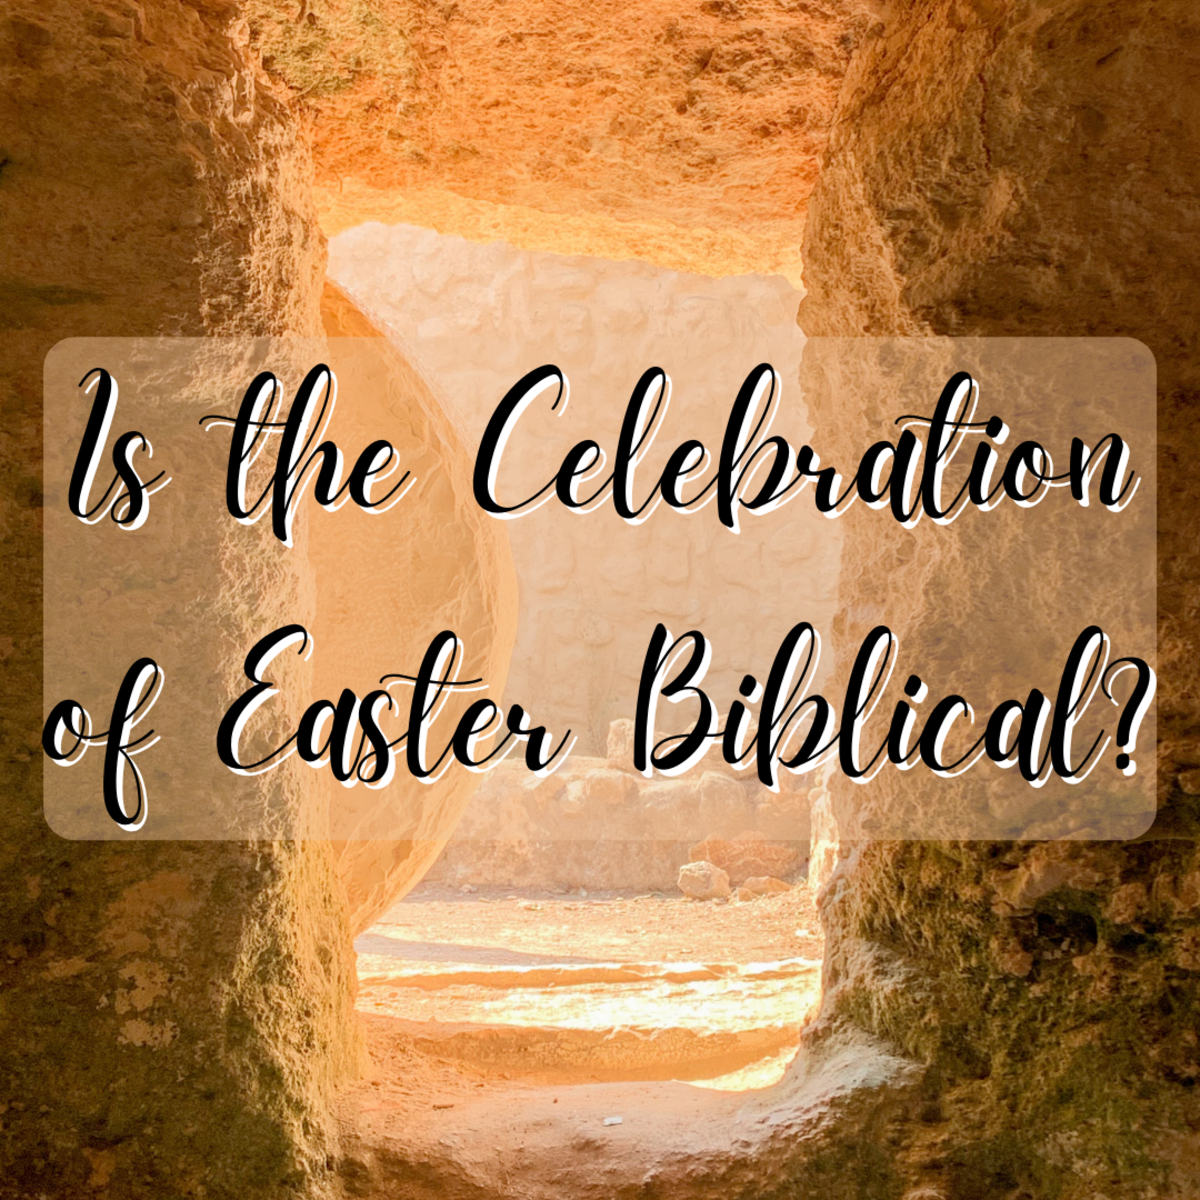 Is the Celebration of Easter Biblical?